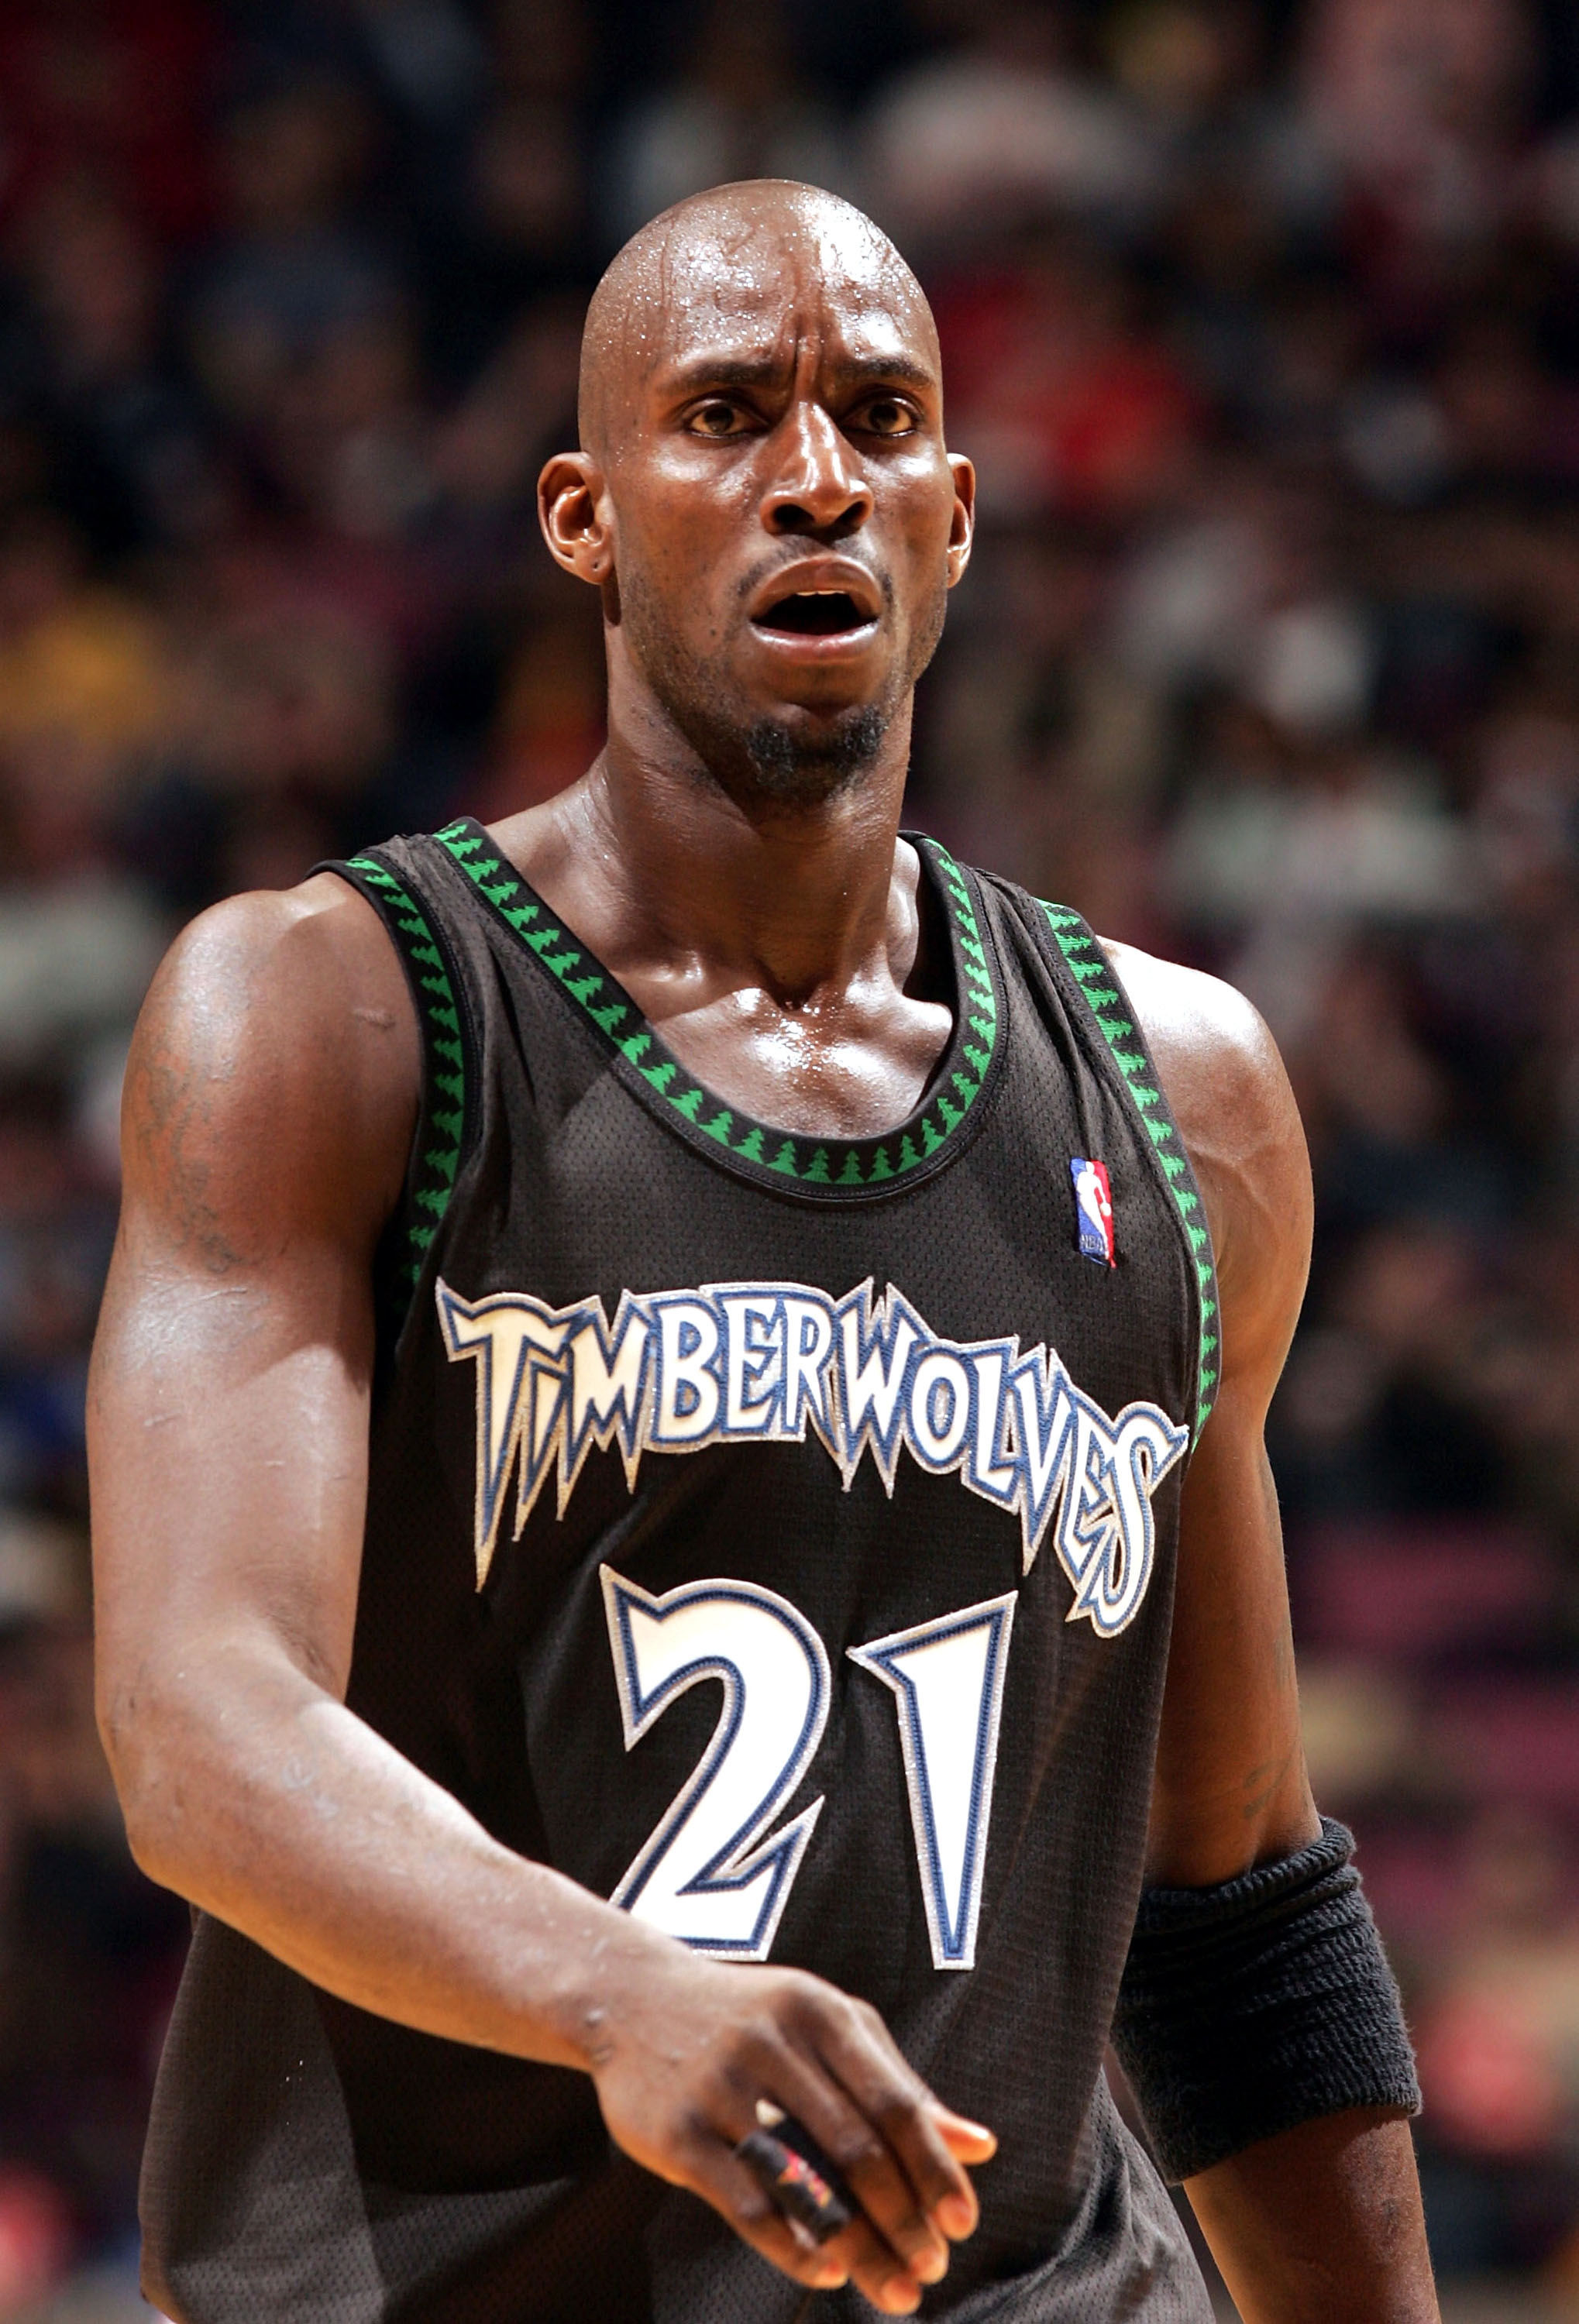 EAST RUTHERFORD , NJ - MARCH 26:  Kevin Garnett #21 of the Minnesota Timberwolves looks on during their game against the New Jersey Nets on March 26, 2005 at Continental Airlines Arena in East Rutherford, New Jersey.  NOTE TO USER:  User expressly acknowl